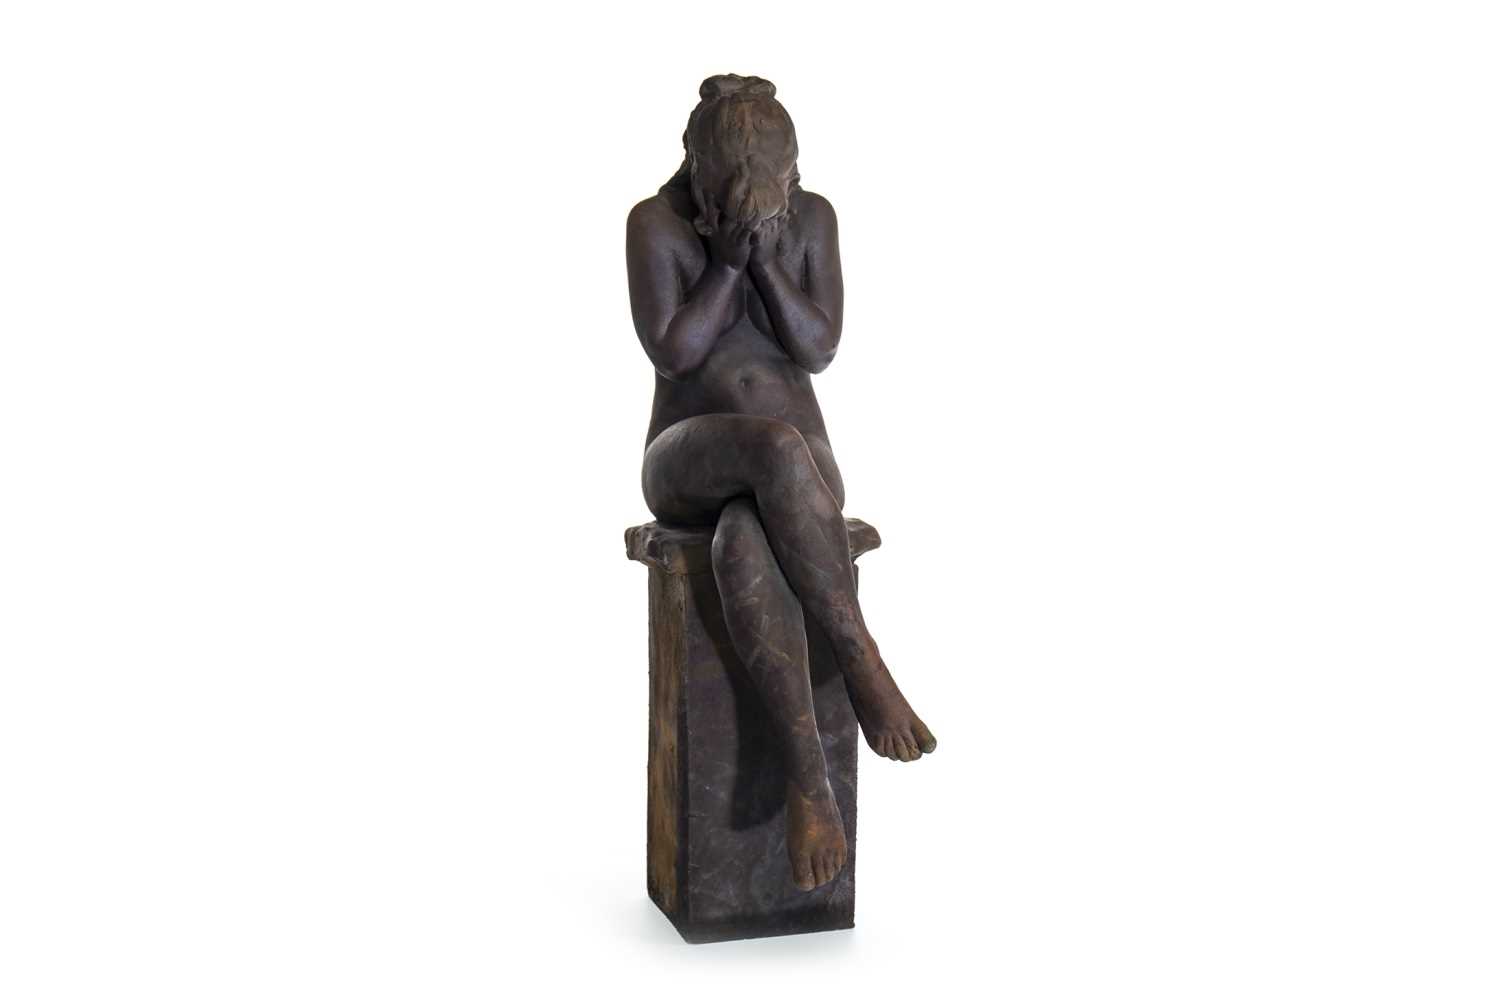 Lot 502 - SUZANNE, A BISQUIT FIRED SCULPTURE BY WALTER AWLSON